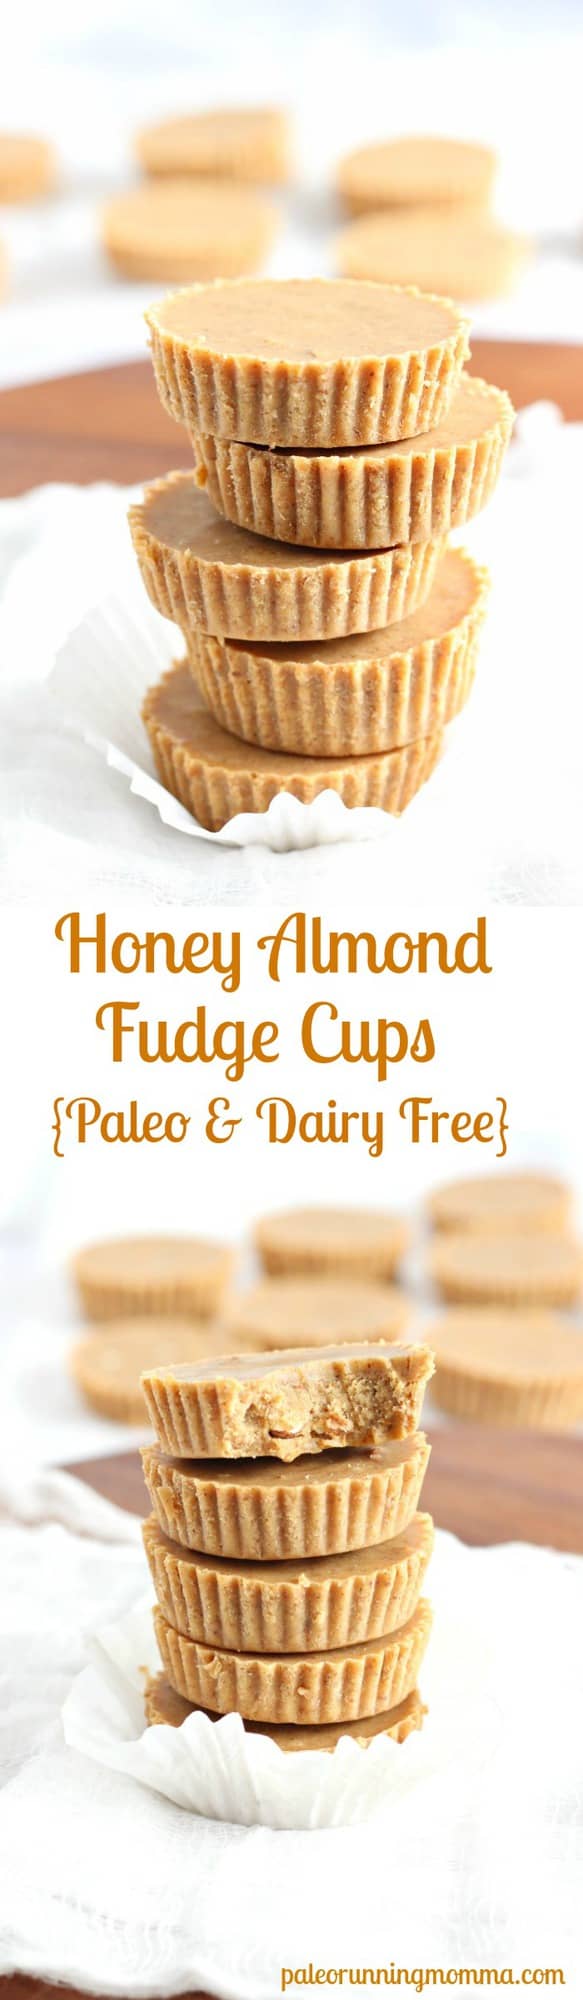 Healthy and super easy 5 ingredient, no cook Honey Almond Fudge Cups! Gluten free, Paleo, dairy free, seriously amazing treat that you won't believe is actually healthy! paleorunningmomma.com